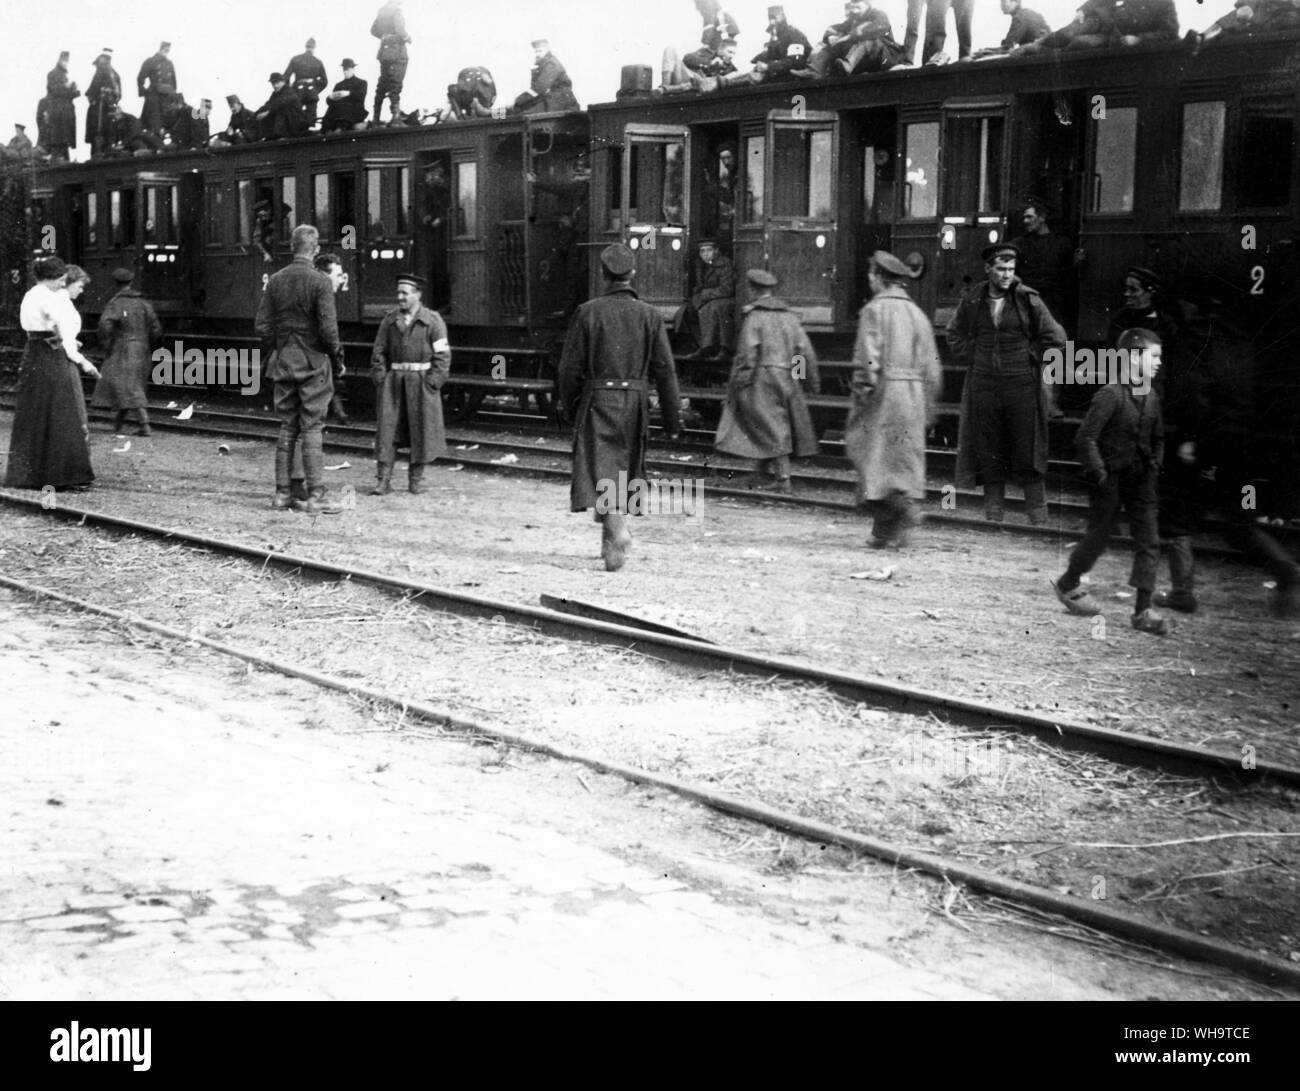 WW1: Belgium: Packed inside and out, this was the last train from Antwerp; the next one was attacked by Germans and most of the troops were captured. The 2nd R N Brigade, the Chatham and Deal Battalions and the Drake Battalion entrained at St Gillaes Waes. The Portsmouth Battalion and 600 stragglers from the Naval Battalion entrained at Kernaeke were derailed and attacked on the 9th October, 1914. Stock Photo